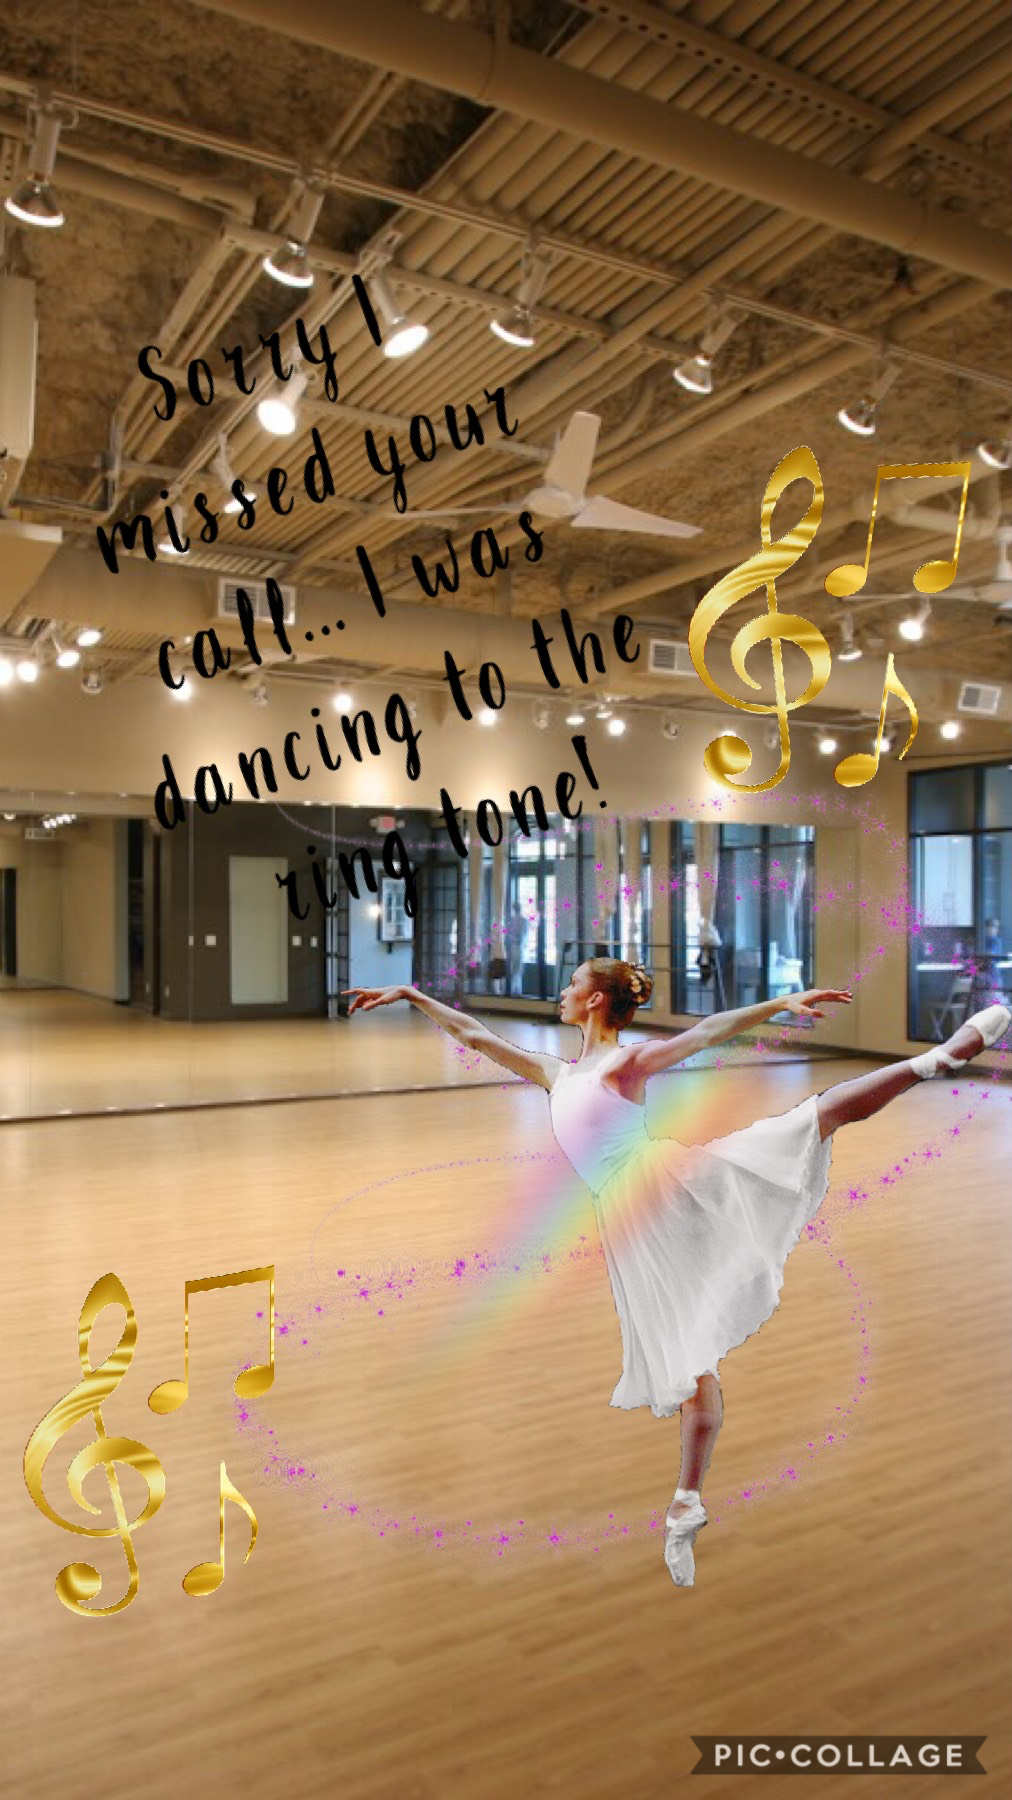 Anther dance quote